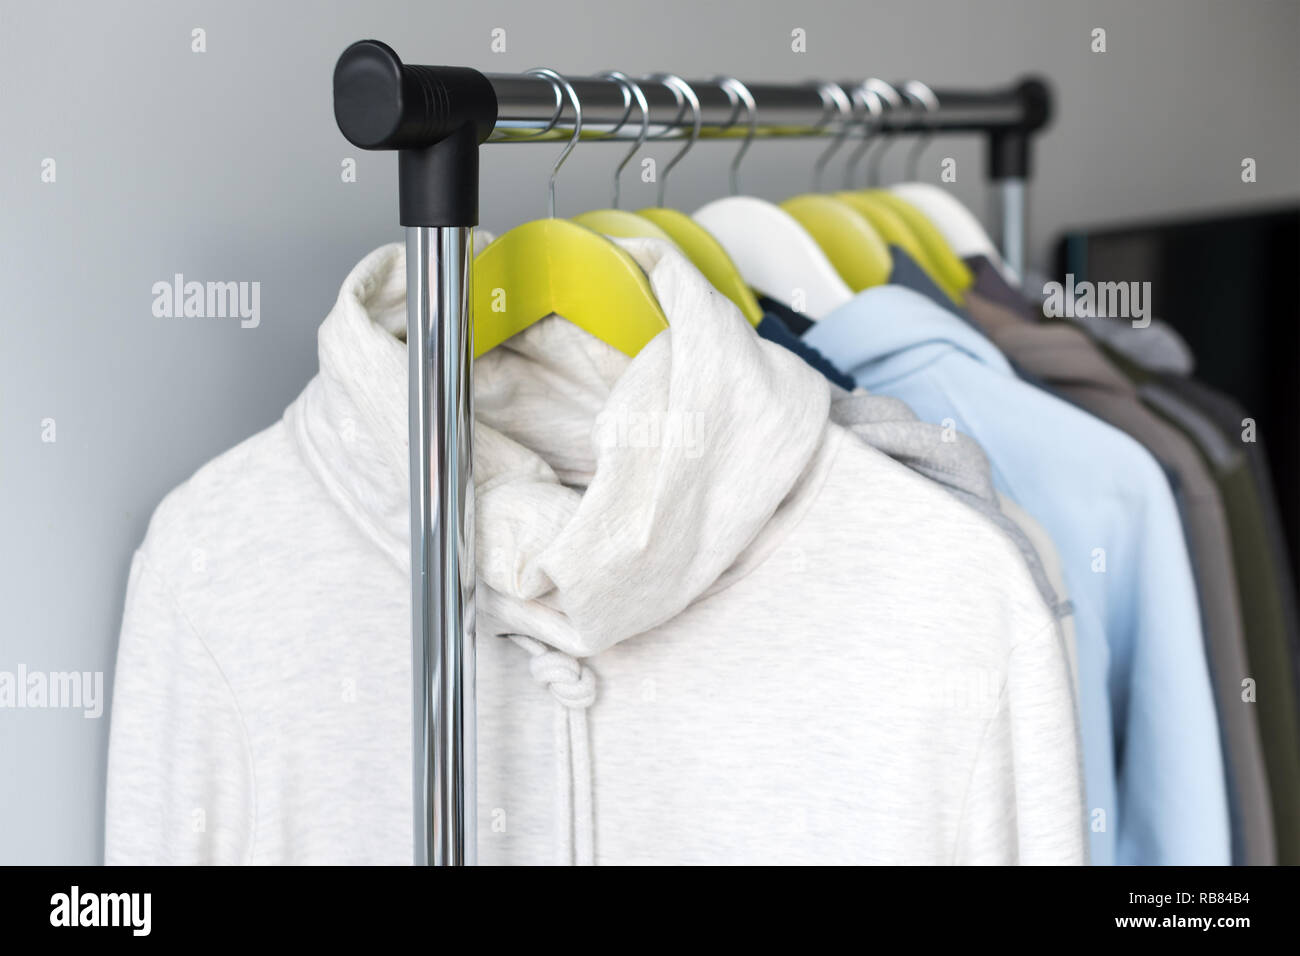 Hanger stand with spring or autumn warm clothes on grey background. Cold season, cozy sweaters and hoodie on hangers Stock Photo